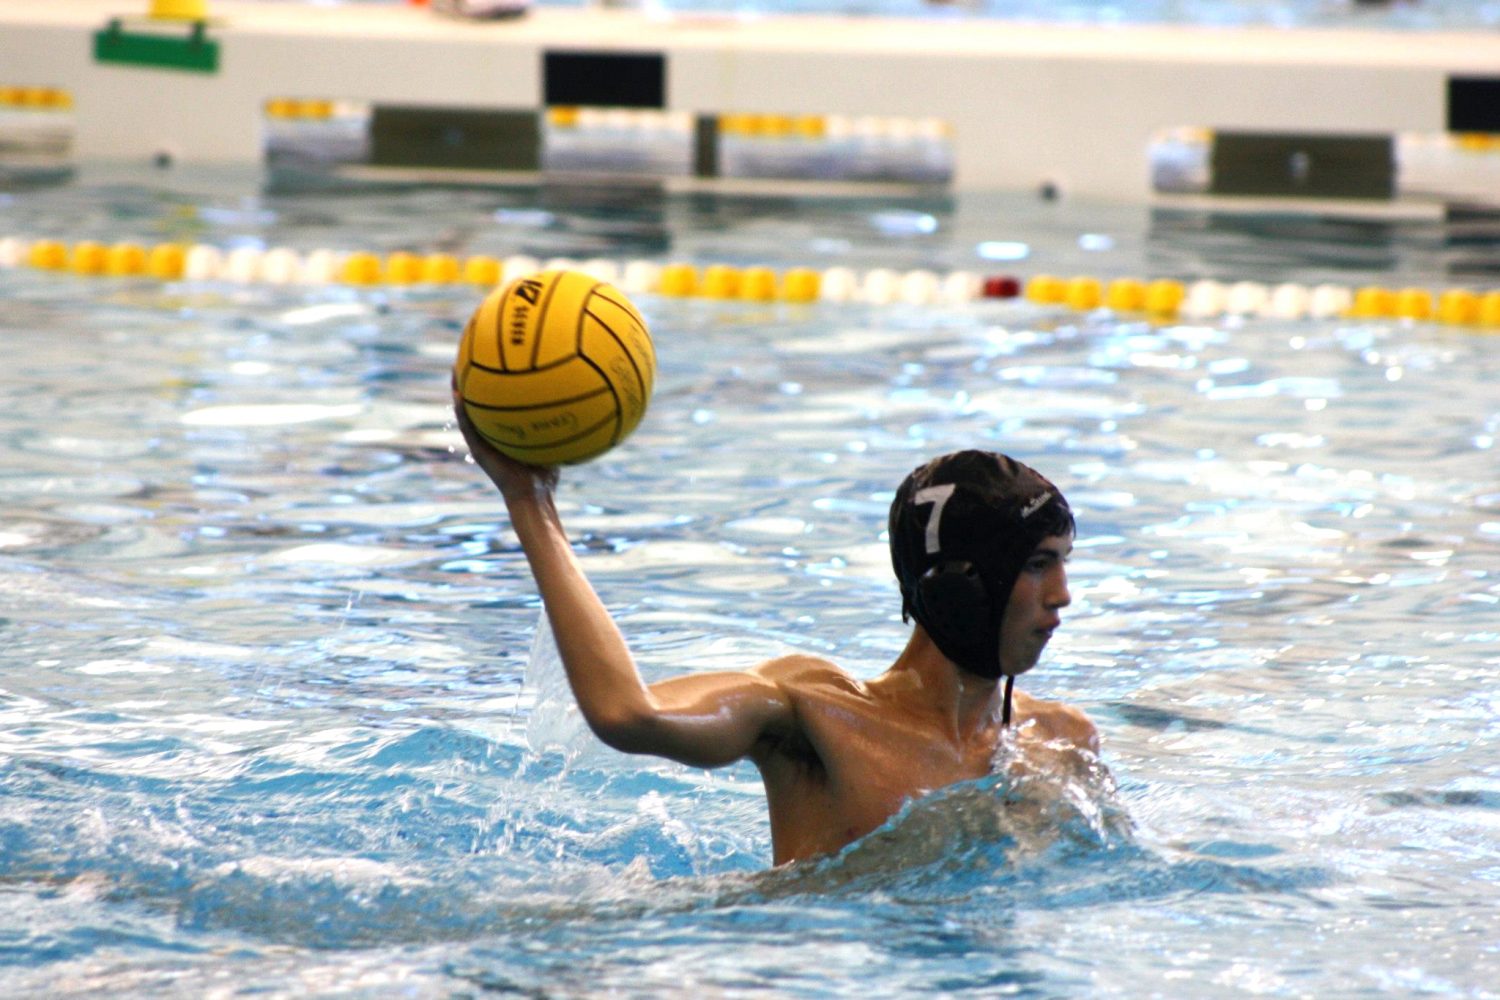 Senior Luke Paddock takes aim at the goal in a water polo game.